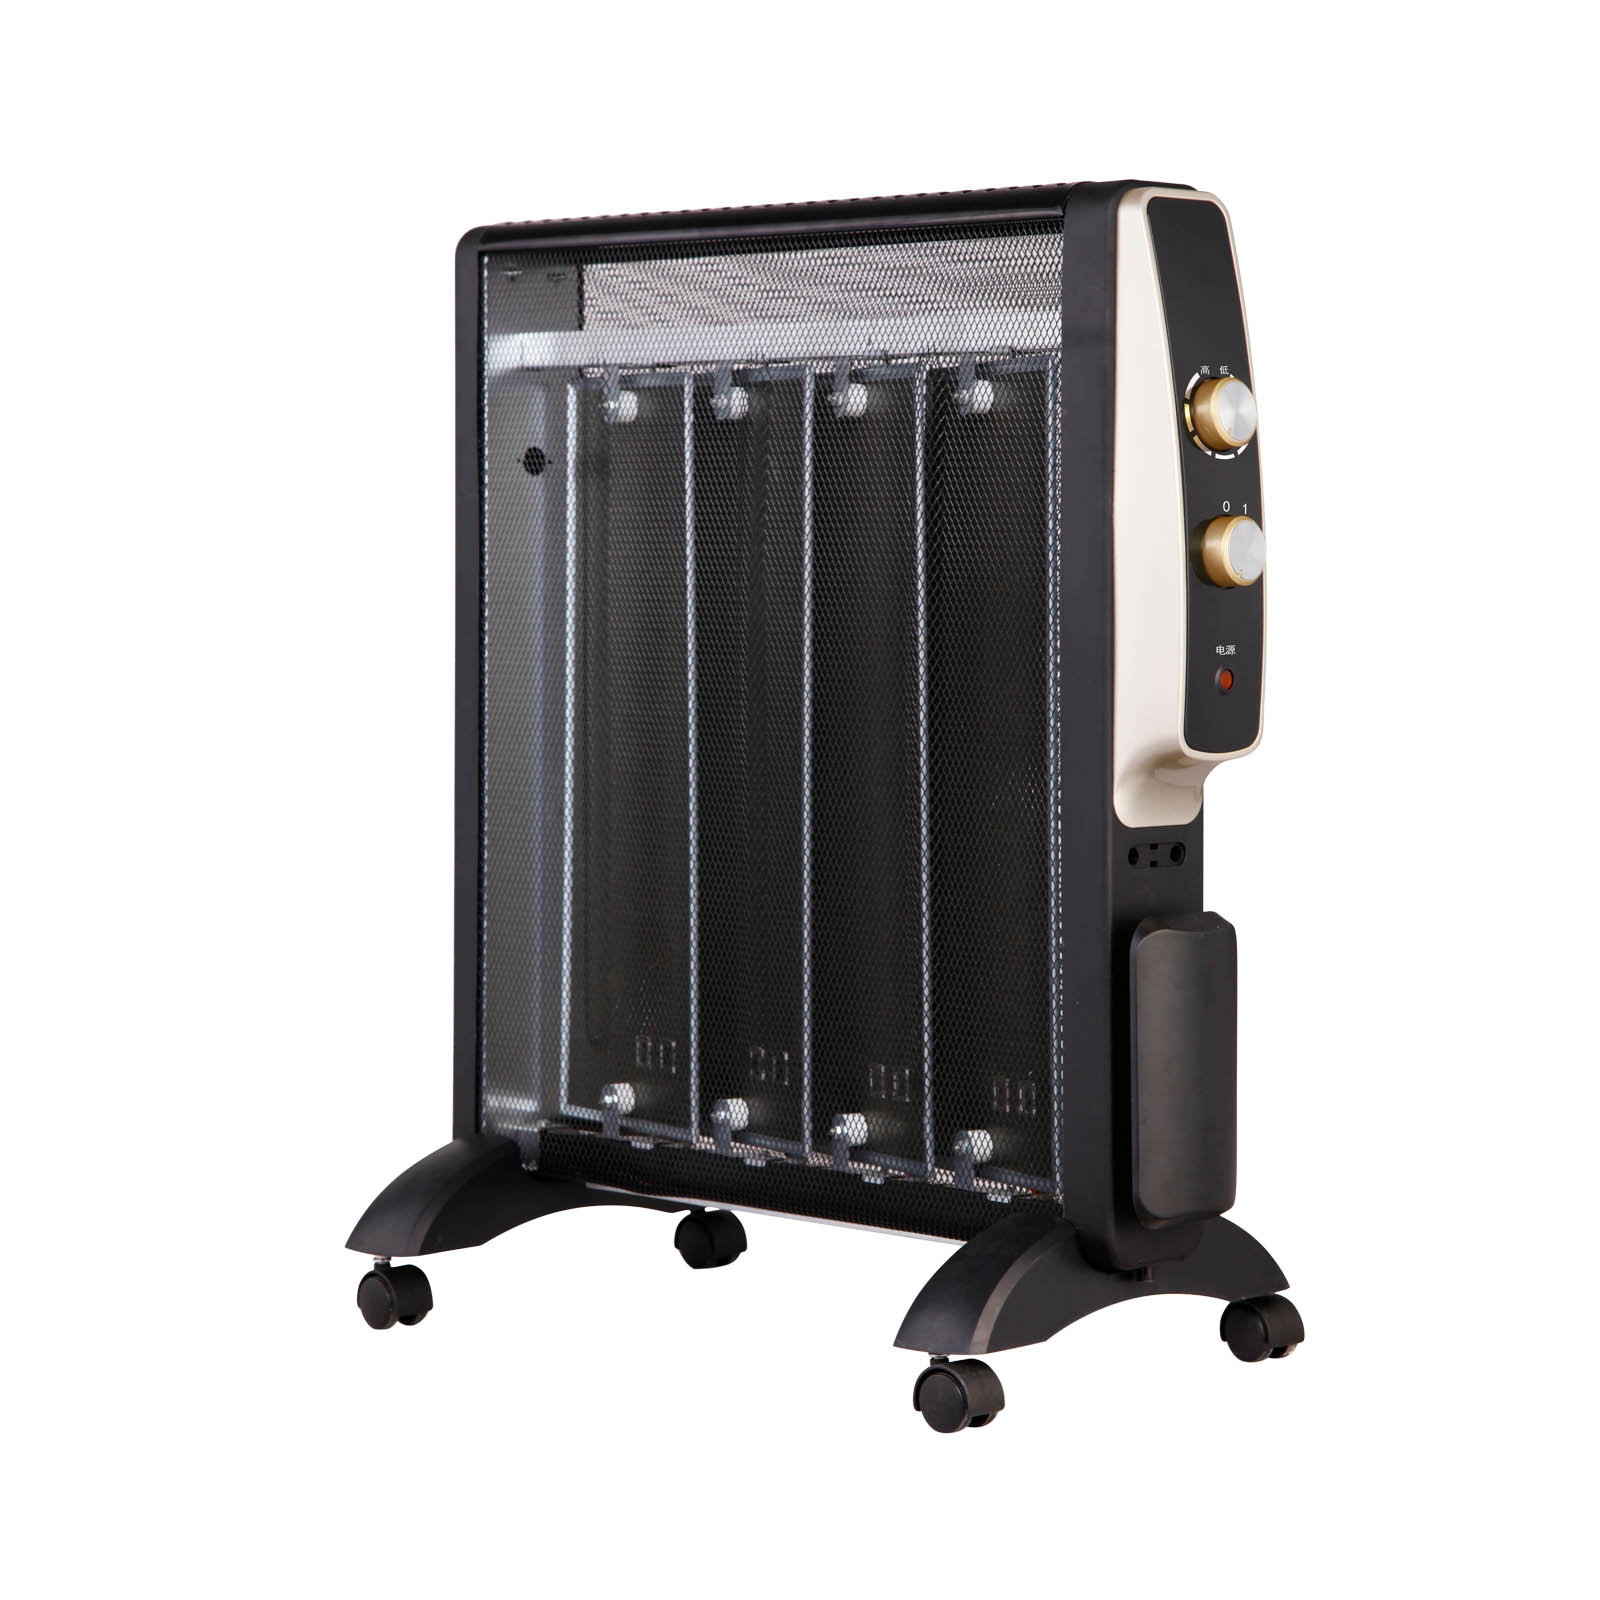 HS-A01 HOWSTODAY Radiant Heaters with Built-in Safety Elements